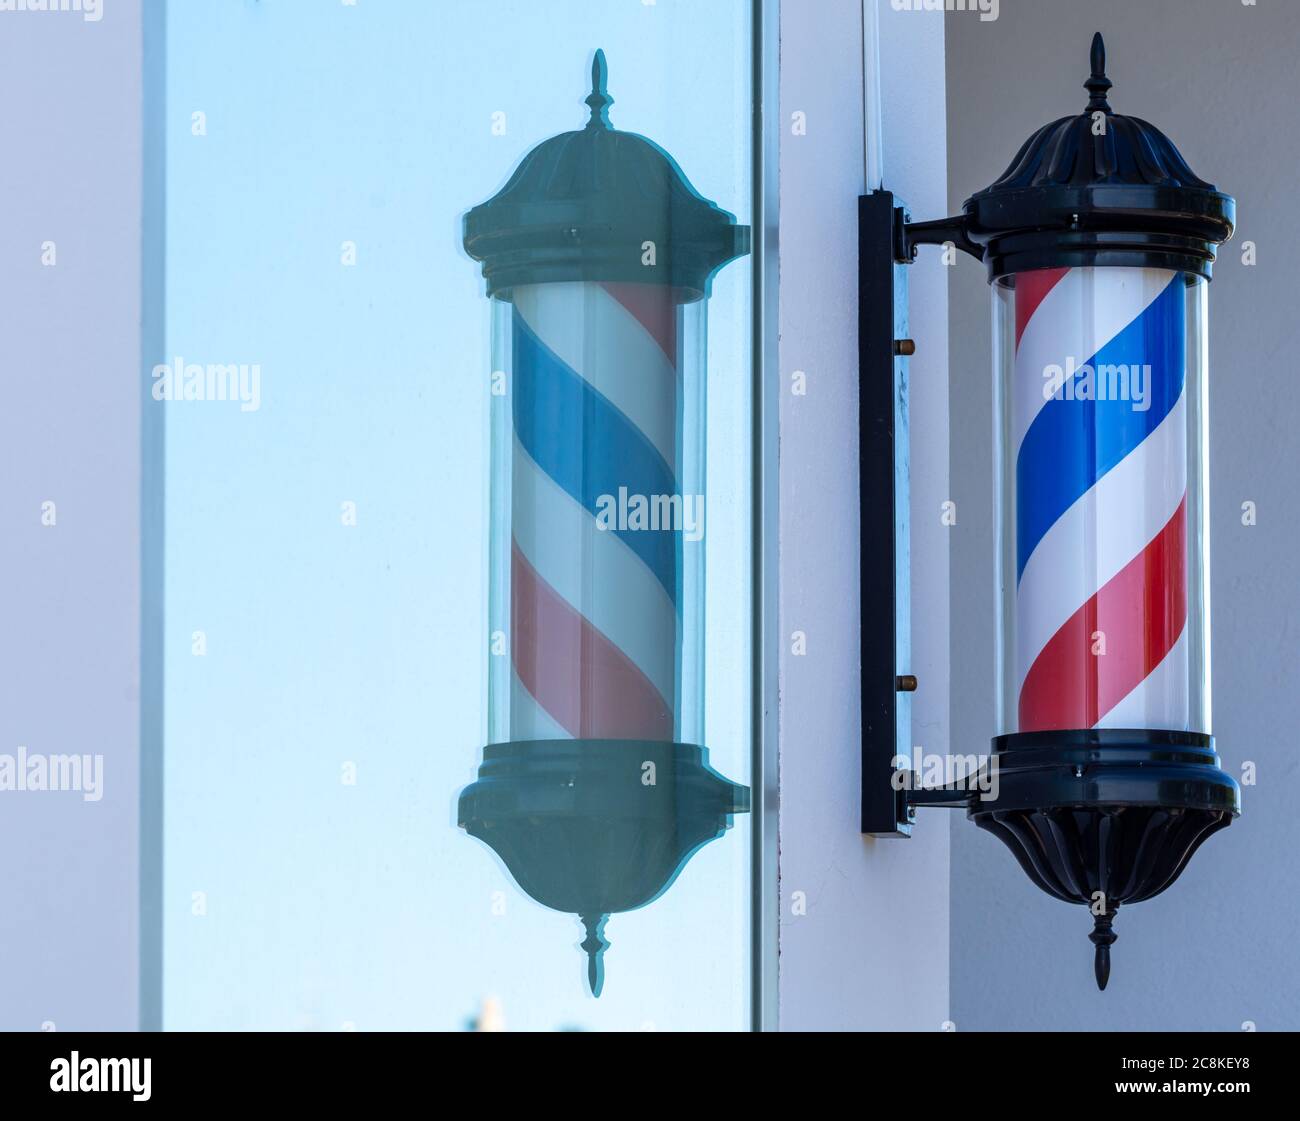 Rotary cylinder of a barber shop and its reflection in the glass of a window Stock Photo